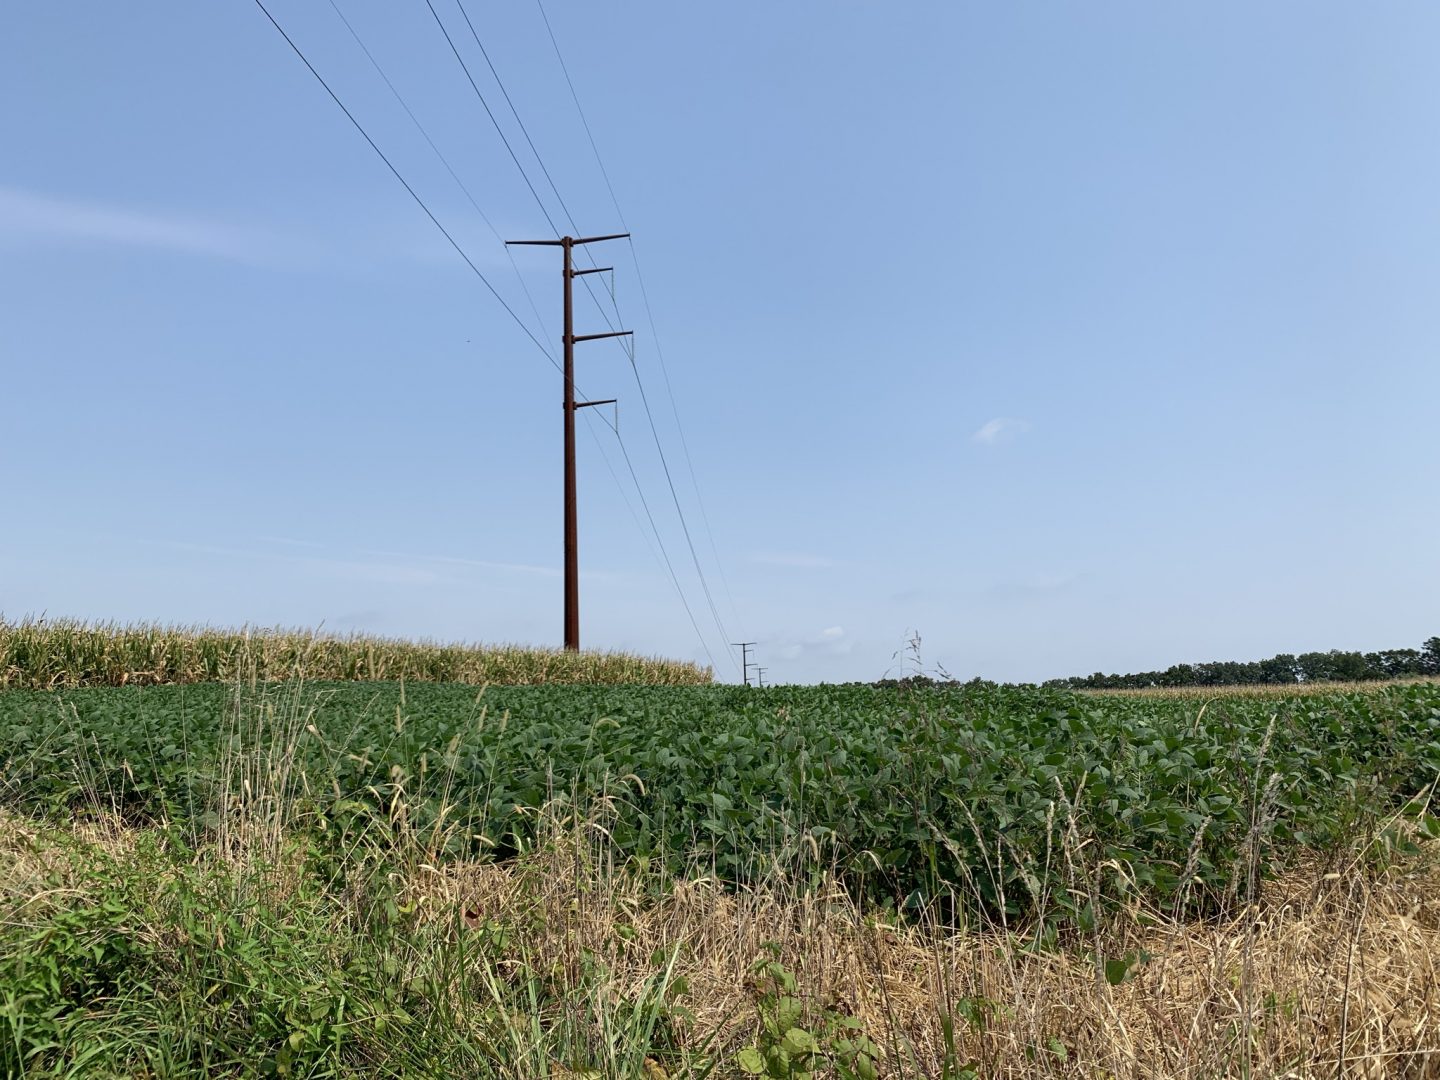 Transmission lines stretch through farm fields in Chanceford Township, York County on Sept. 13, 2021.